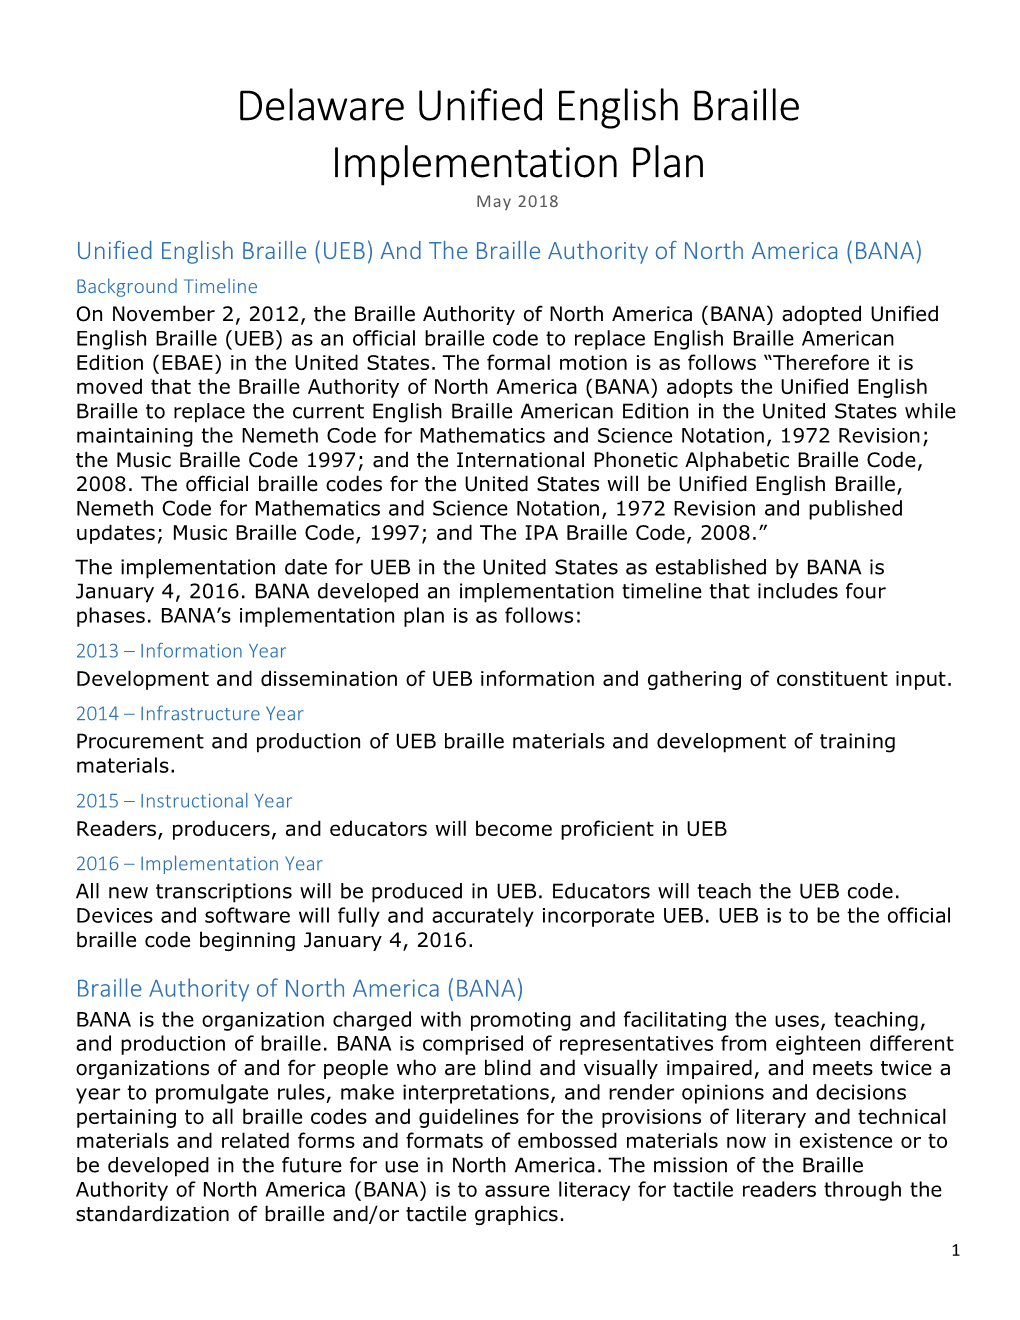 Delaware Unified English Braille Implementation Plan May 2018